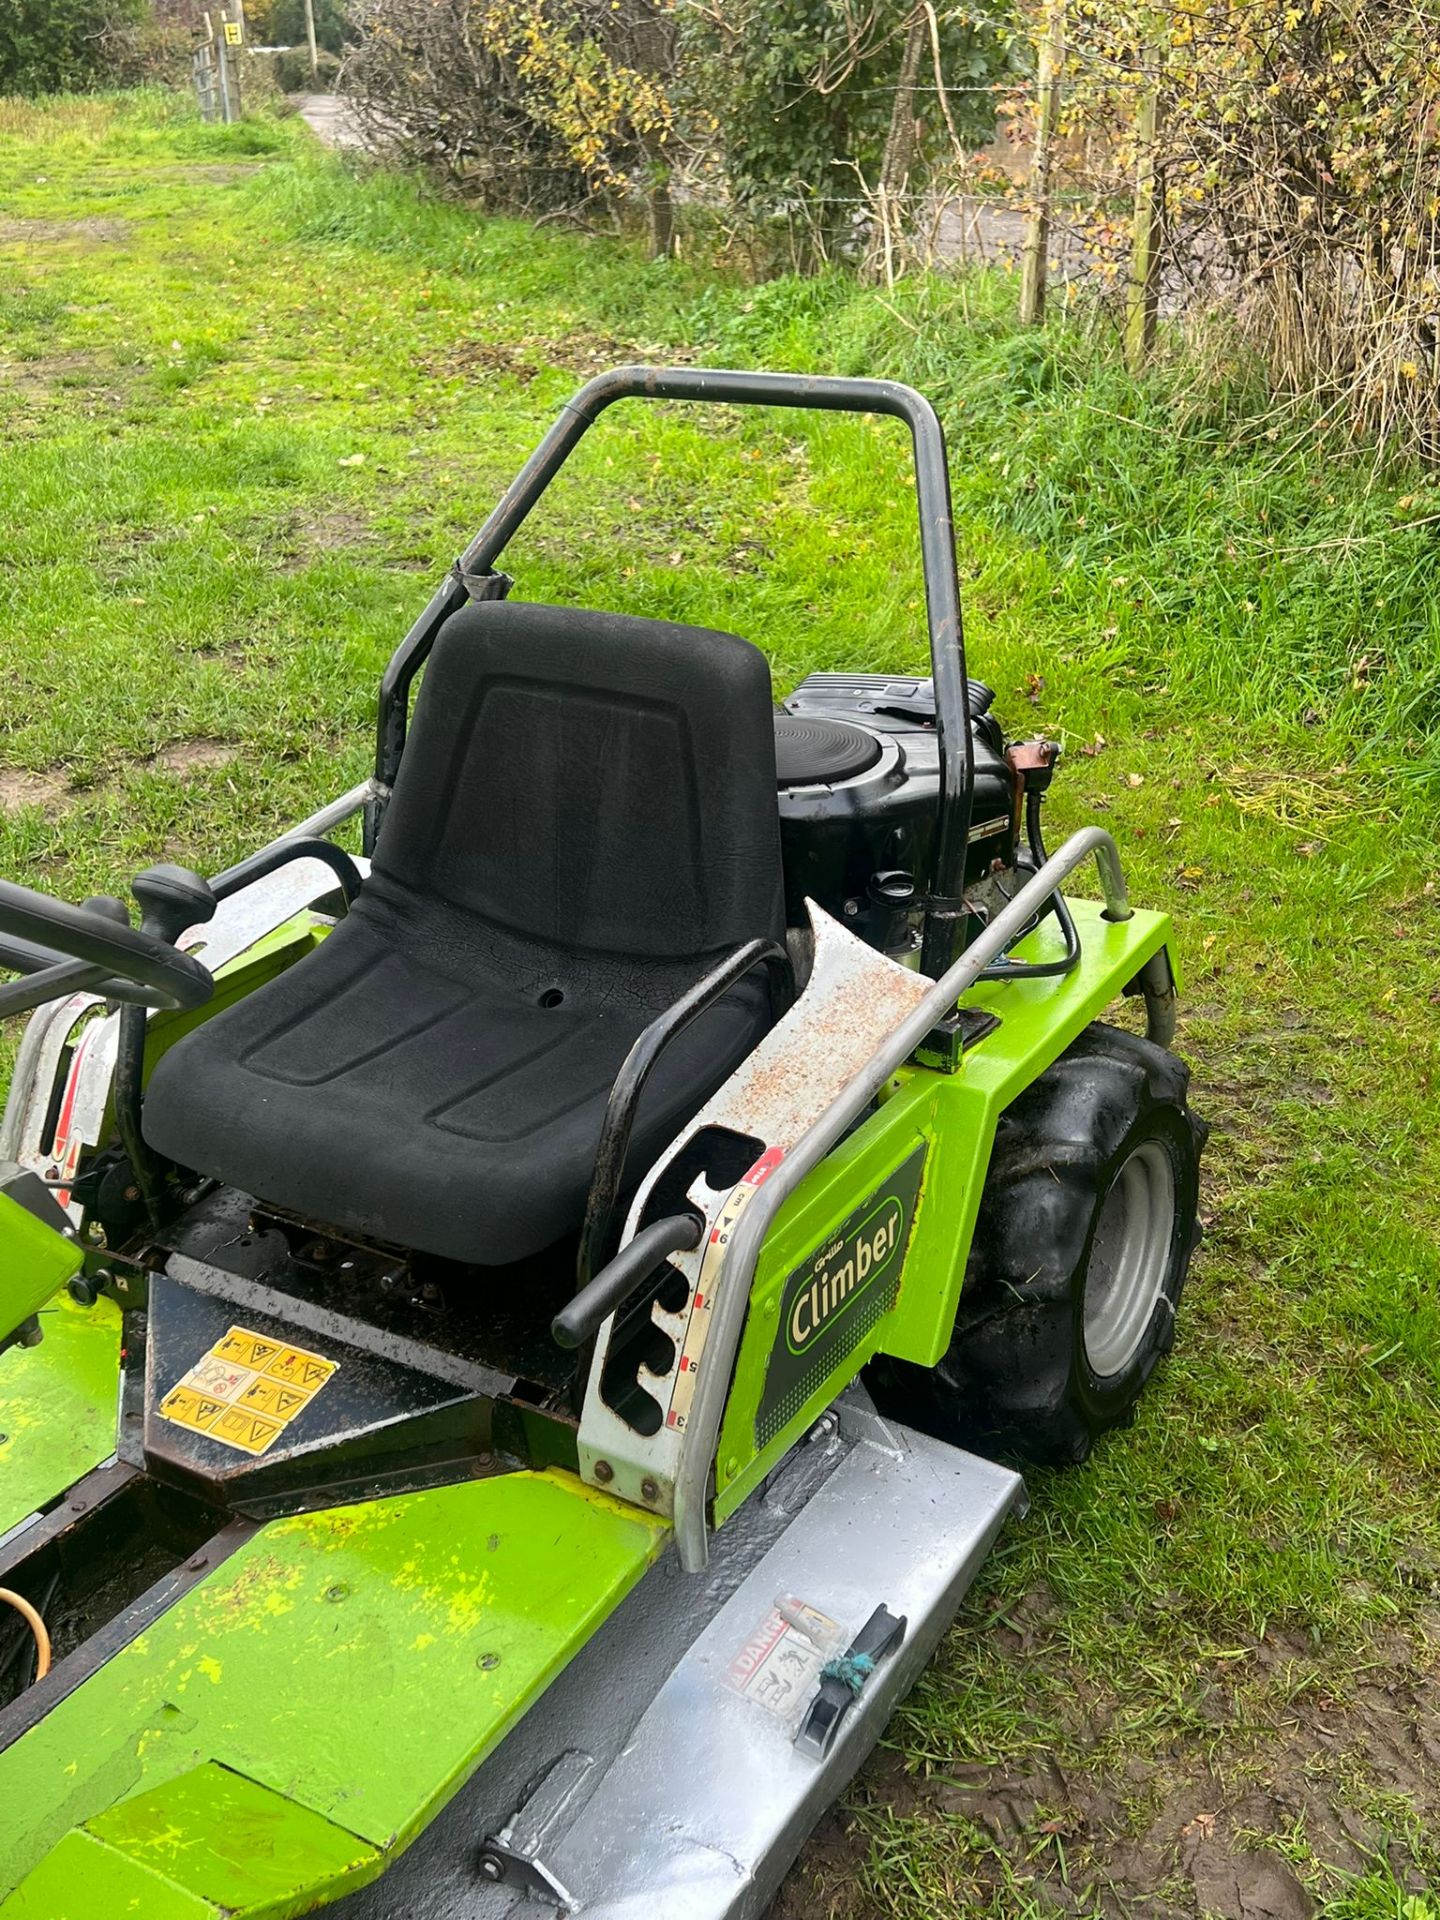 GRILLO CLIMBER 910 RIDE ON LAWN MOWER BANK MOWER - 18HP V TWIN BRIGGS AND STRATTON ENGINE *PLUS VAT* - Image 7 of 8